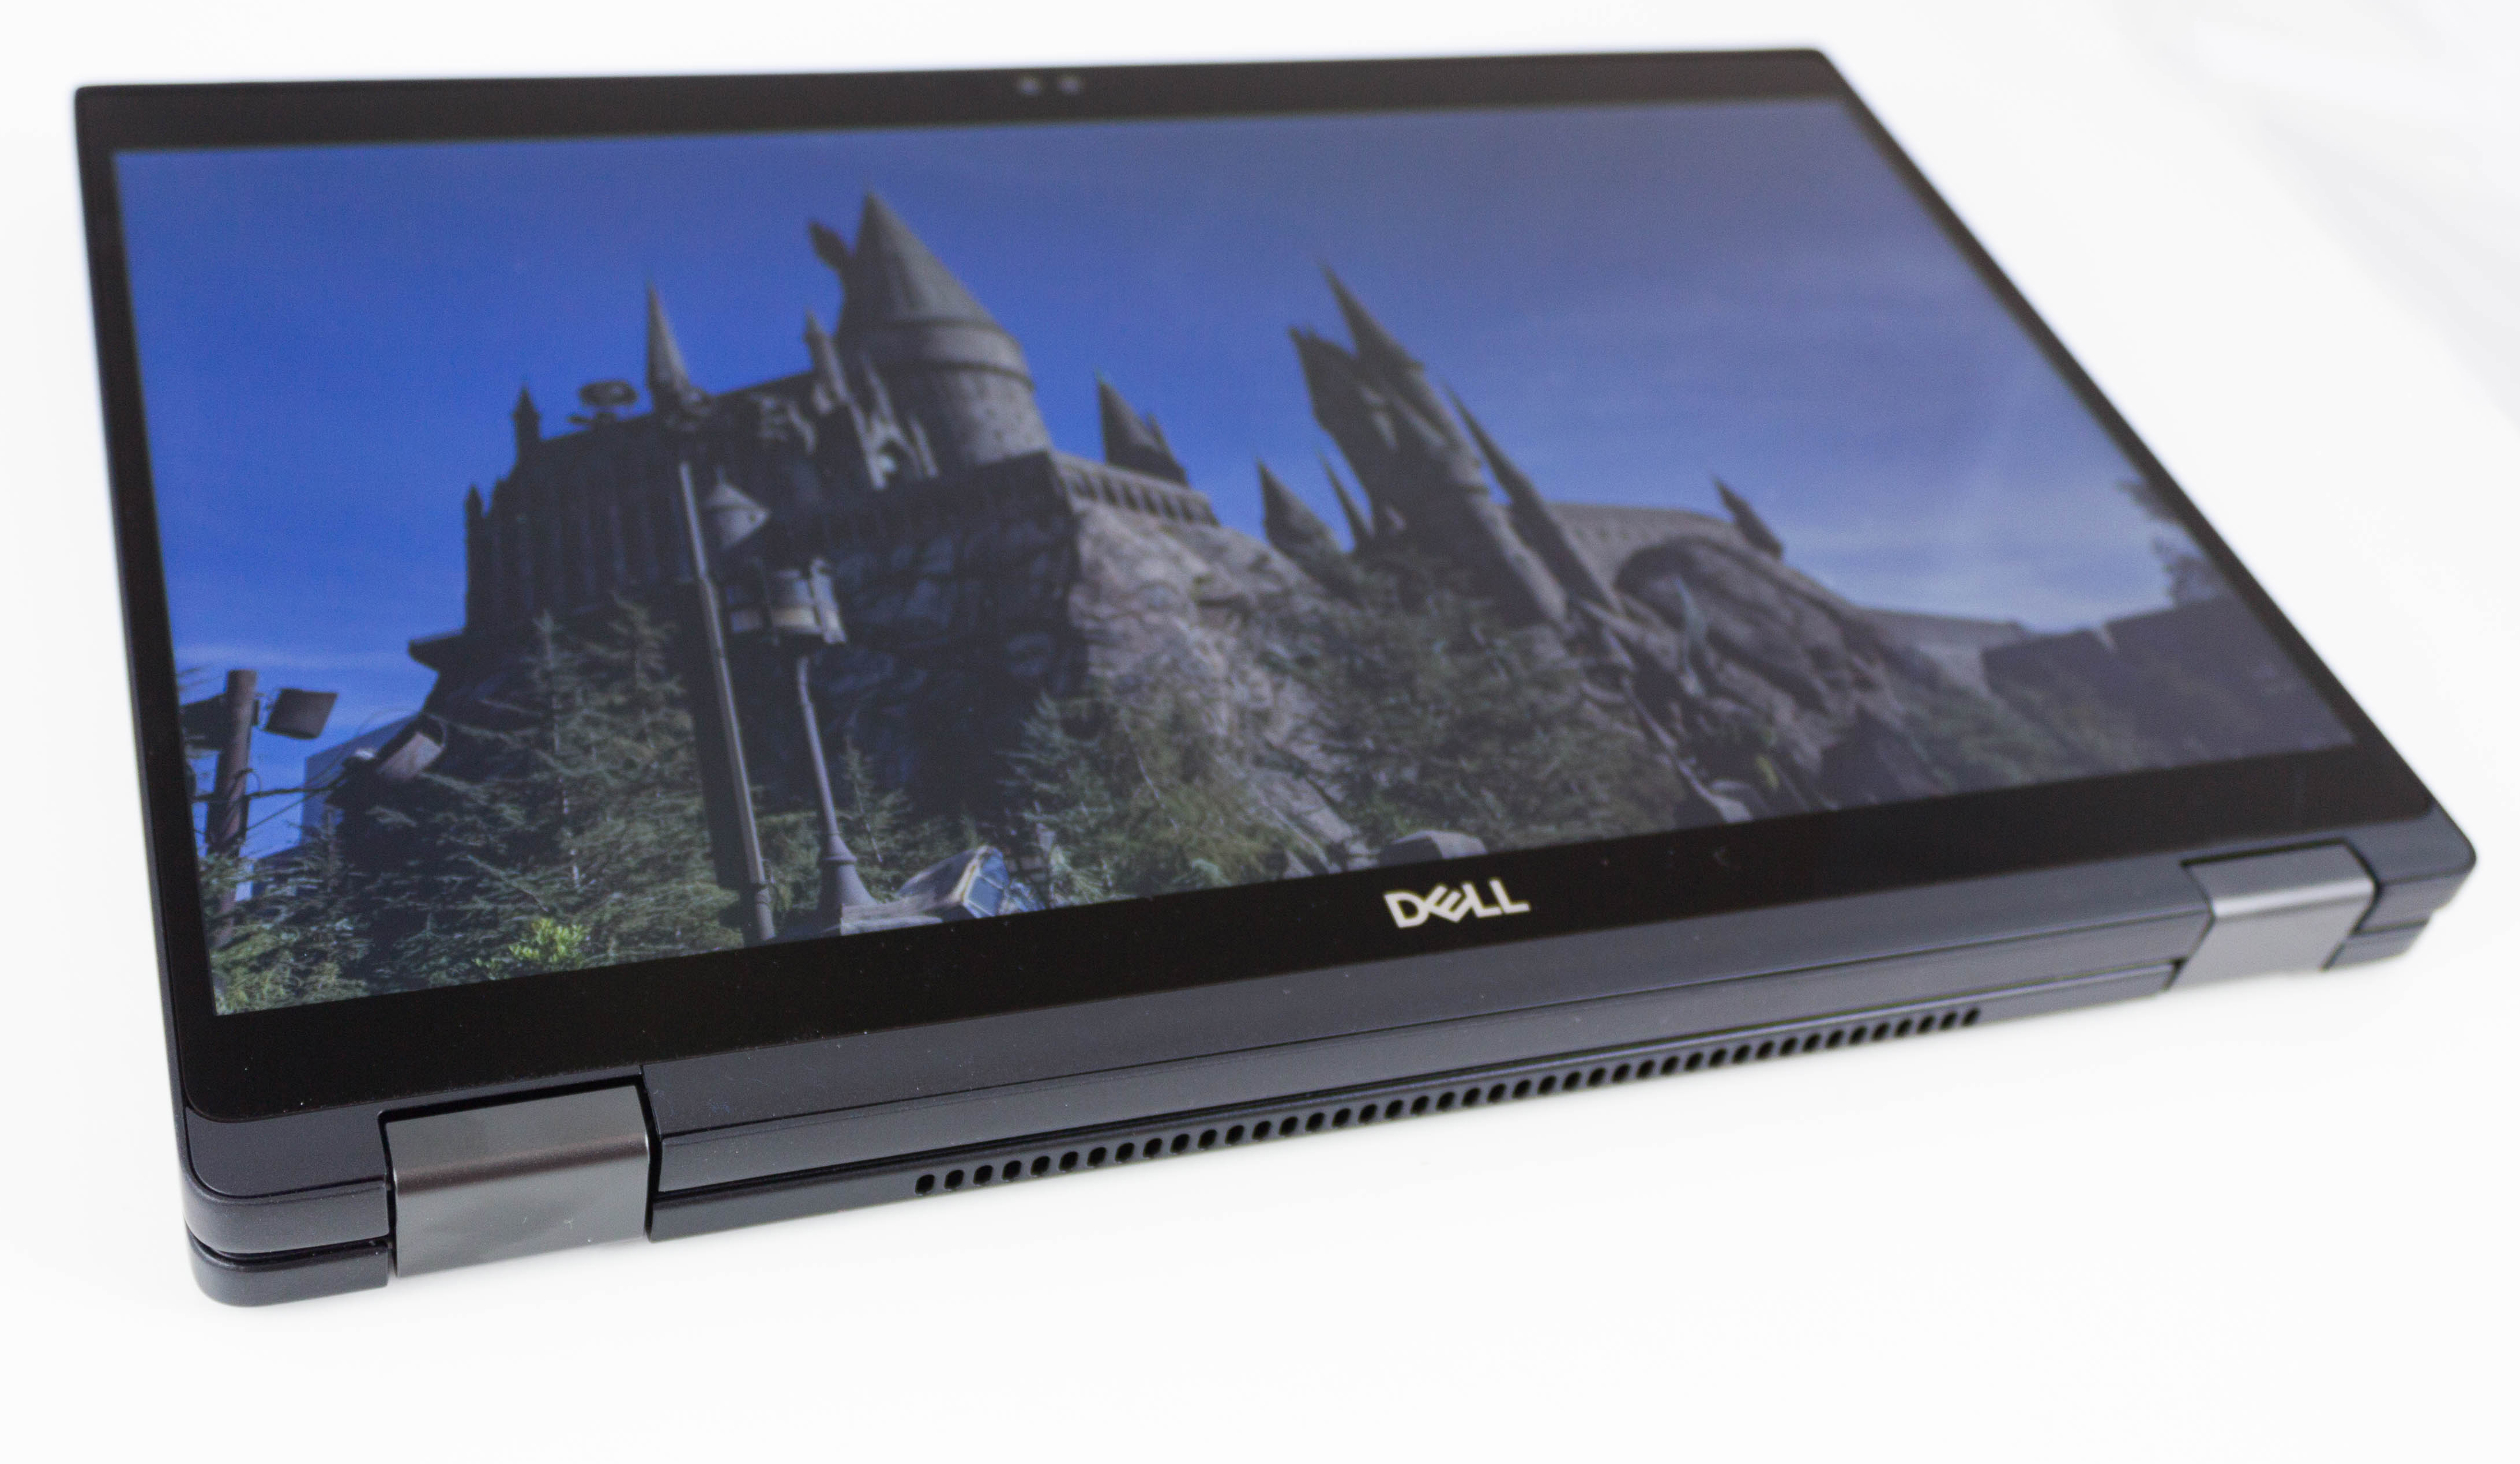 Final Words - The Dell Latitude 13 7390 2-in-1 Review